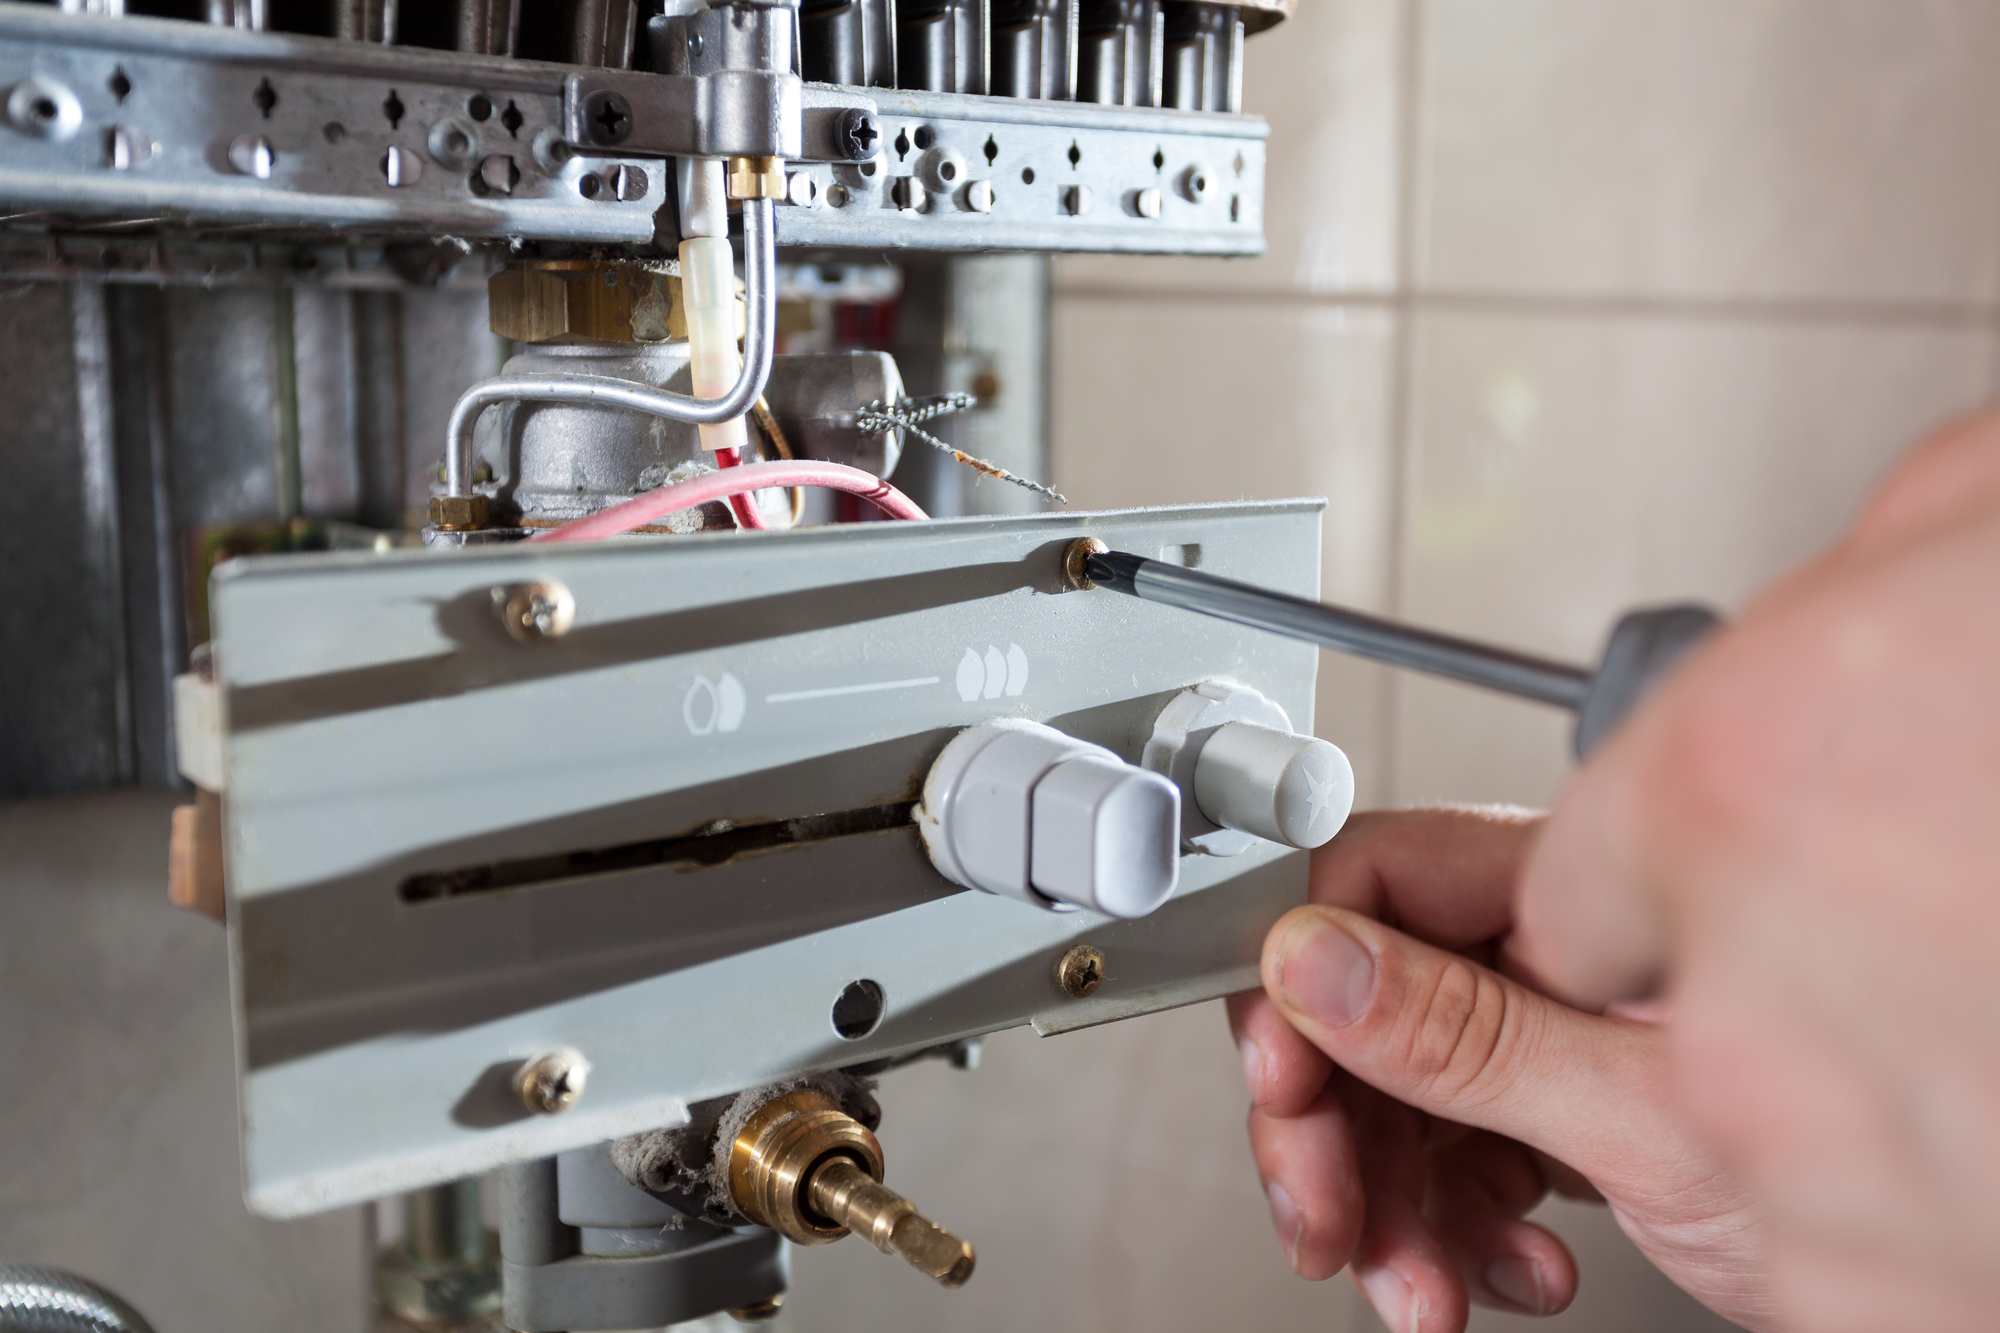 Plumber fixing a gas water heater with screwdriver